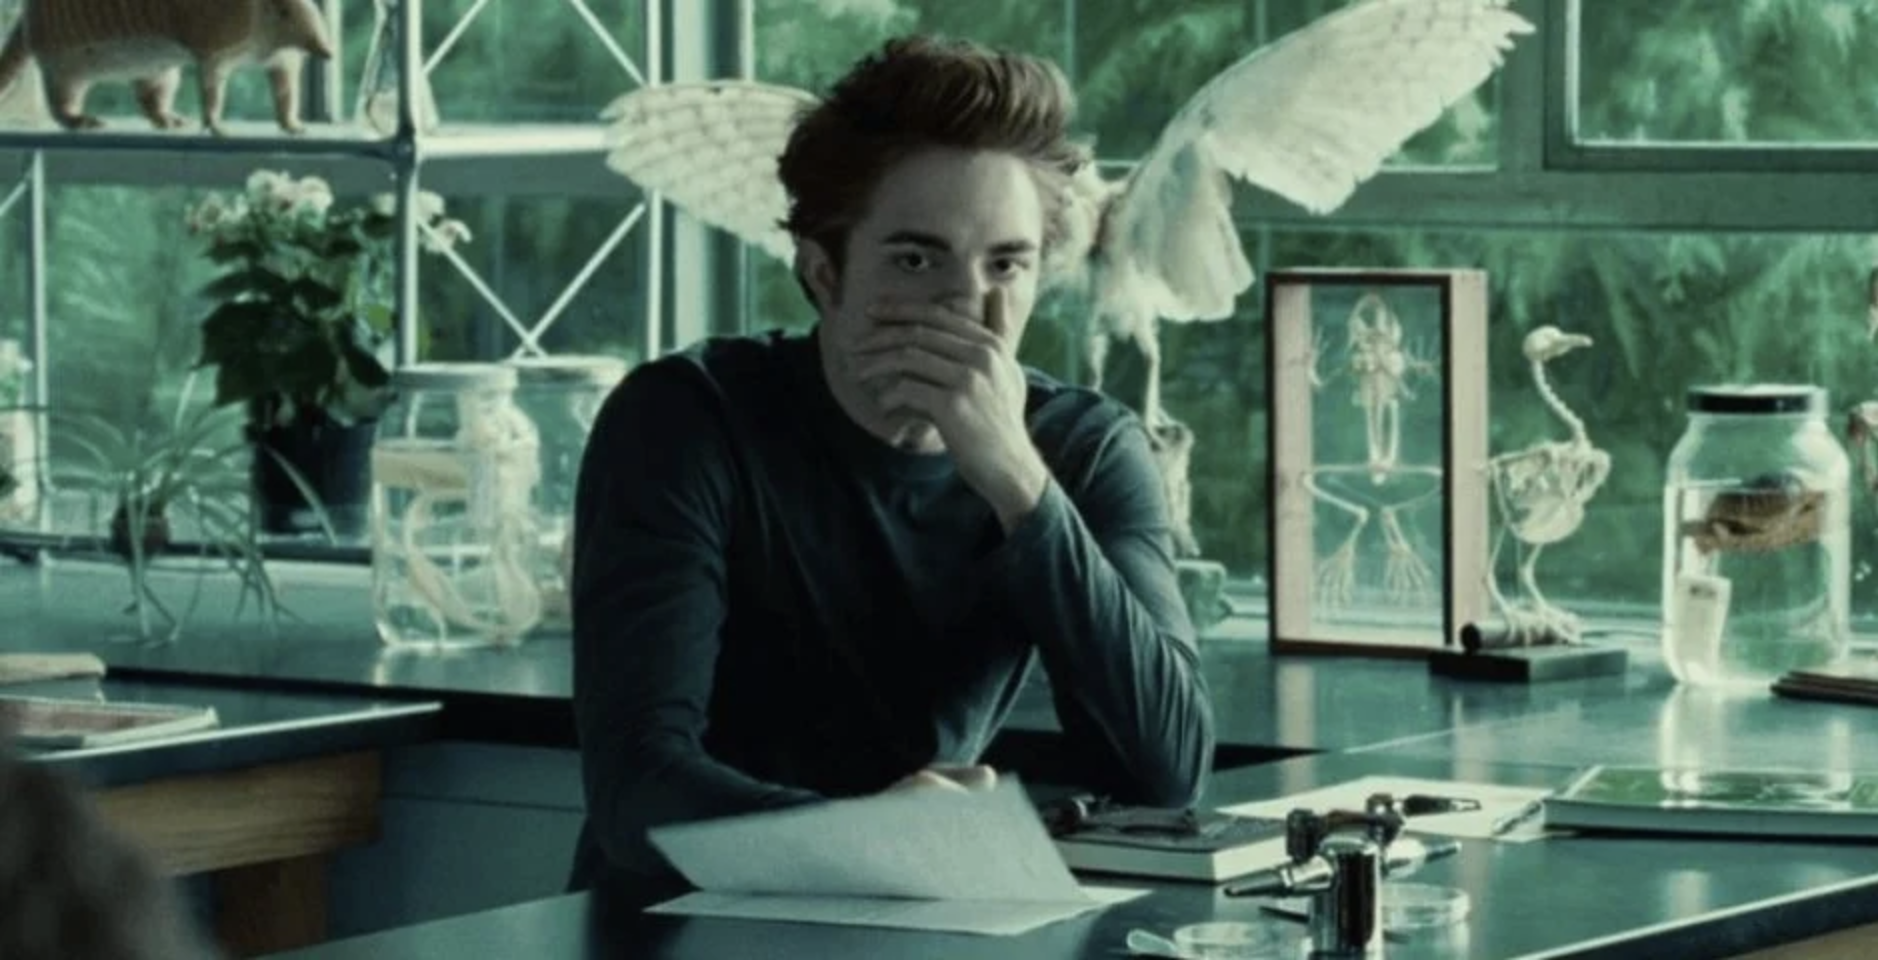 12.Edward's. hilariously dramatic reaction to seeing/smelling Bella fo...